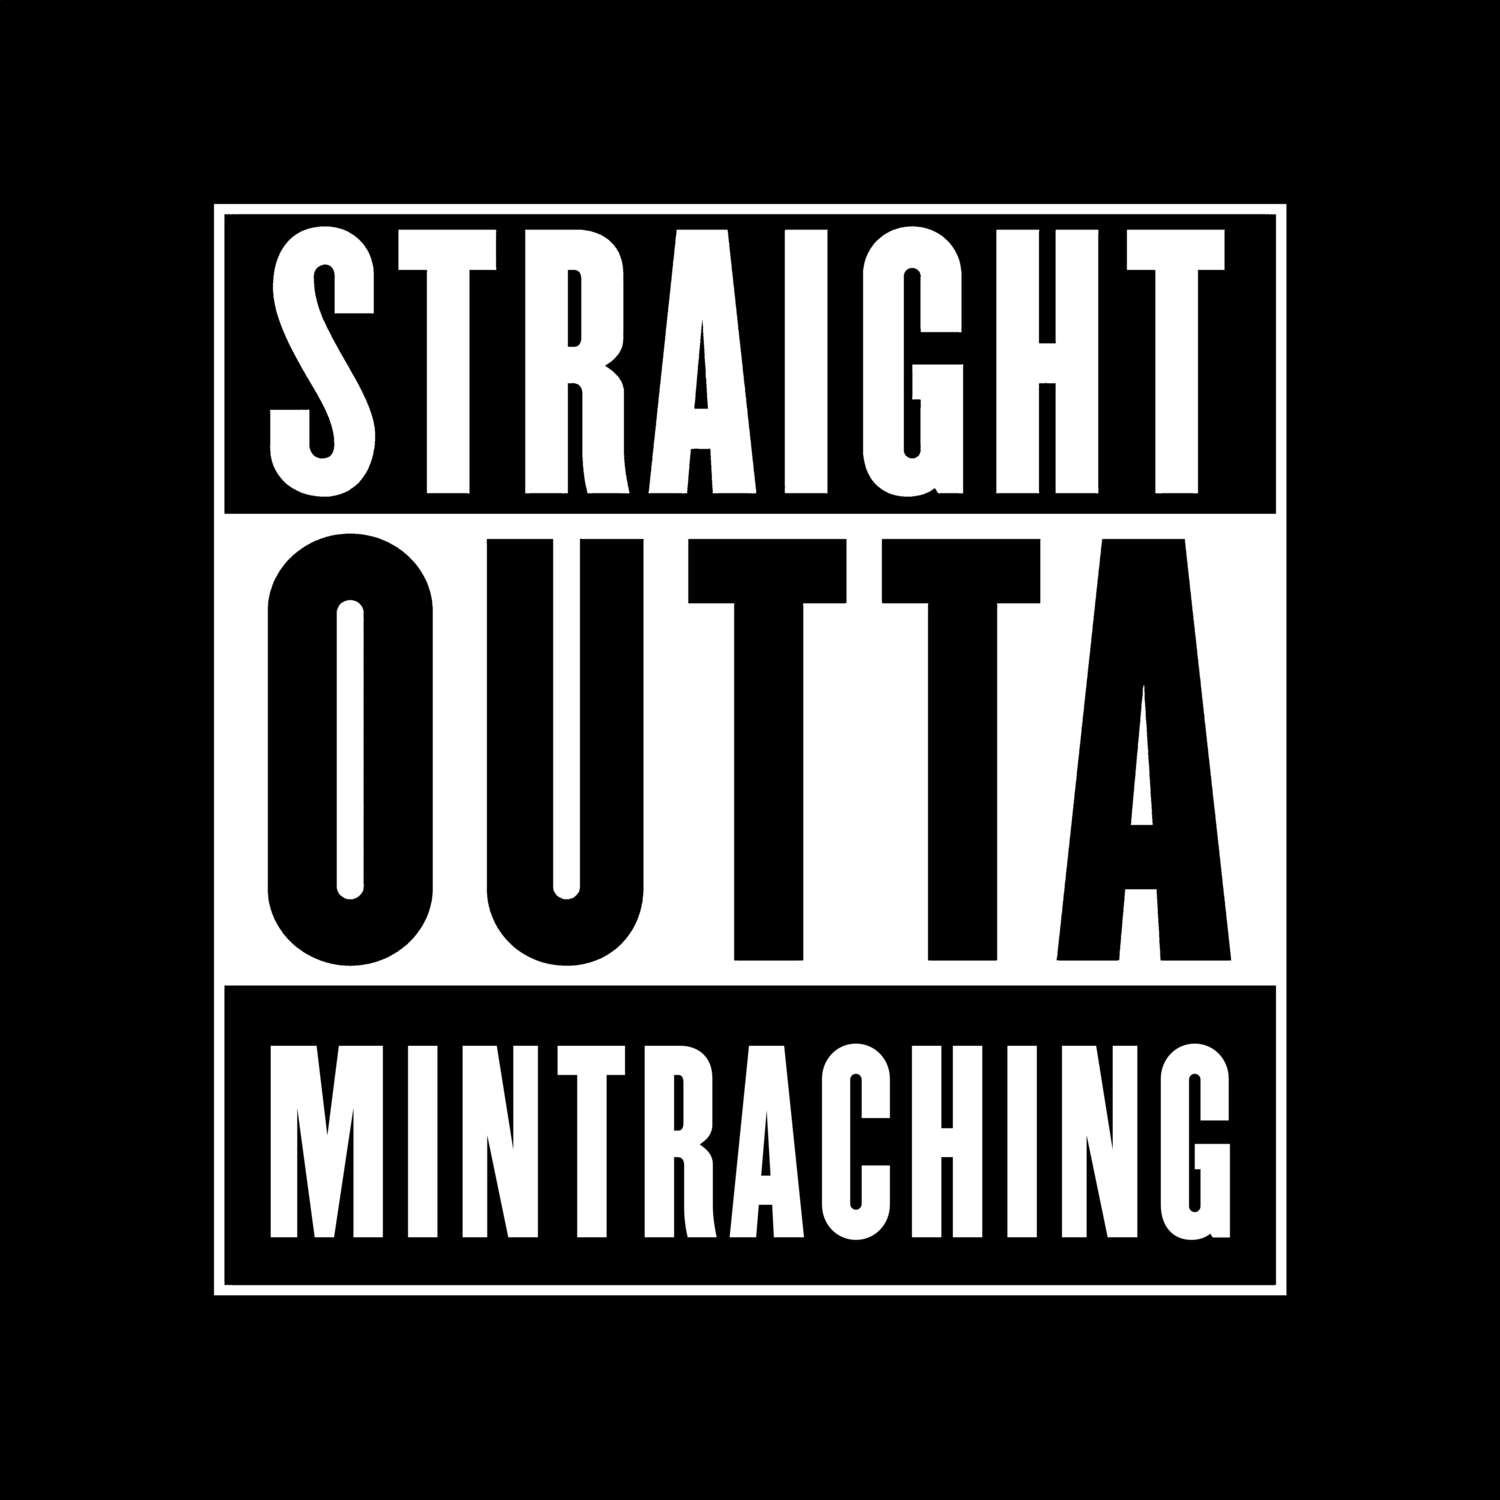 Mintraching T-Shirt »Straight Outta«